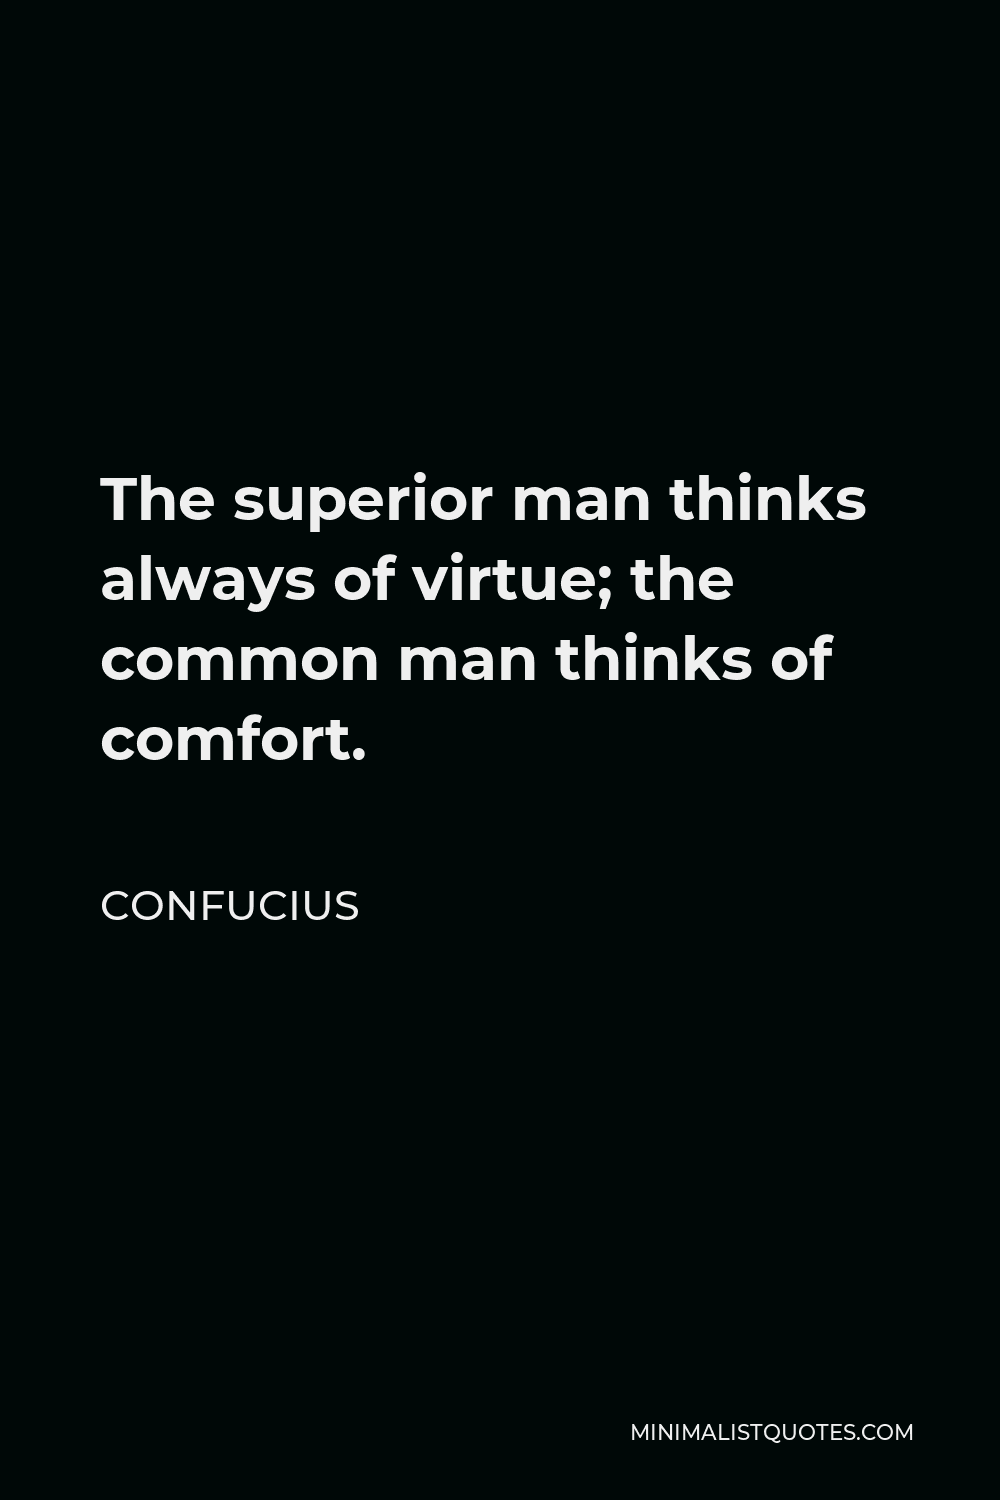 Confucius Quote - The superior man thinks always of virtue; the common man thinks of comfort.